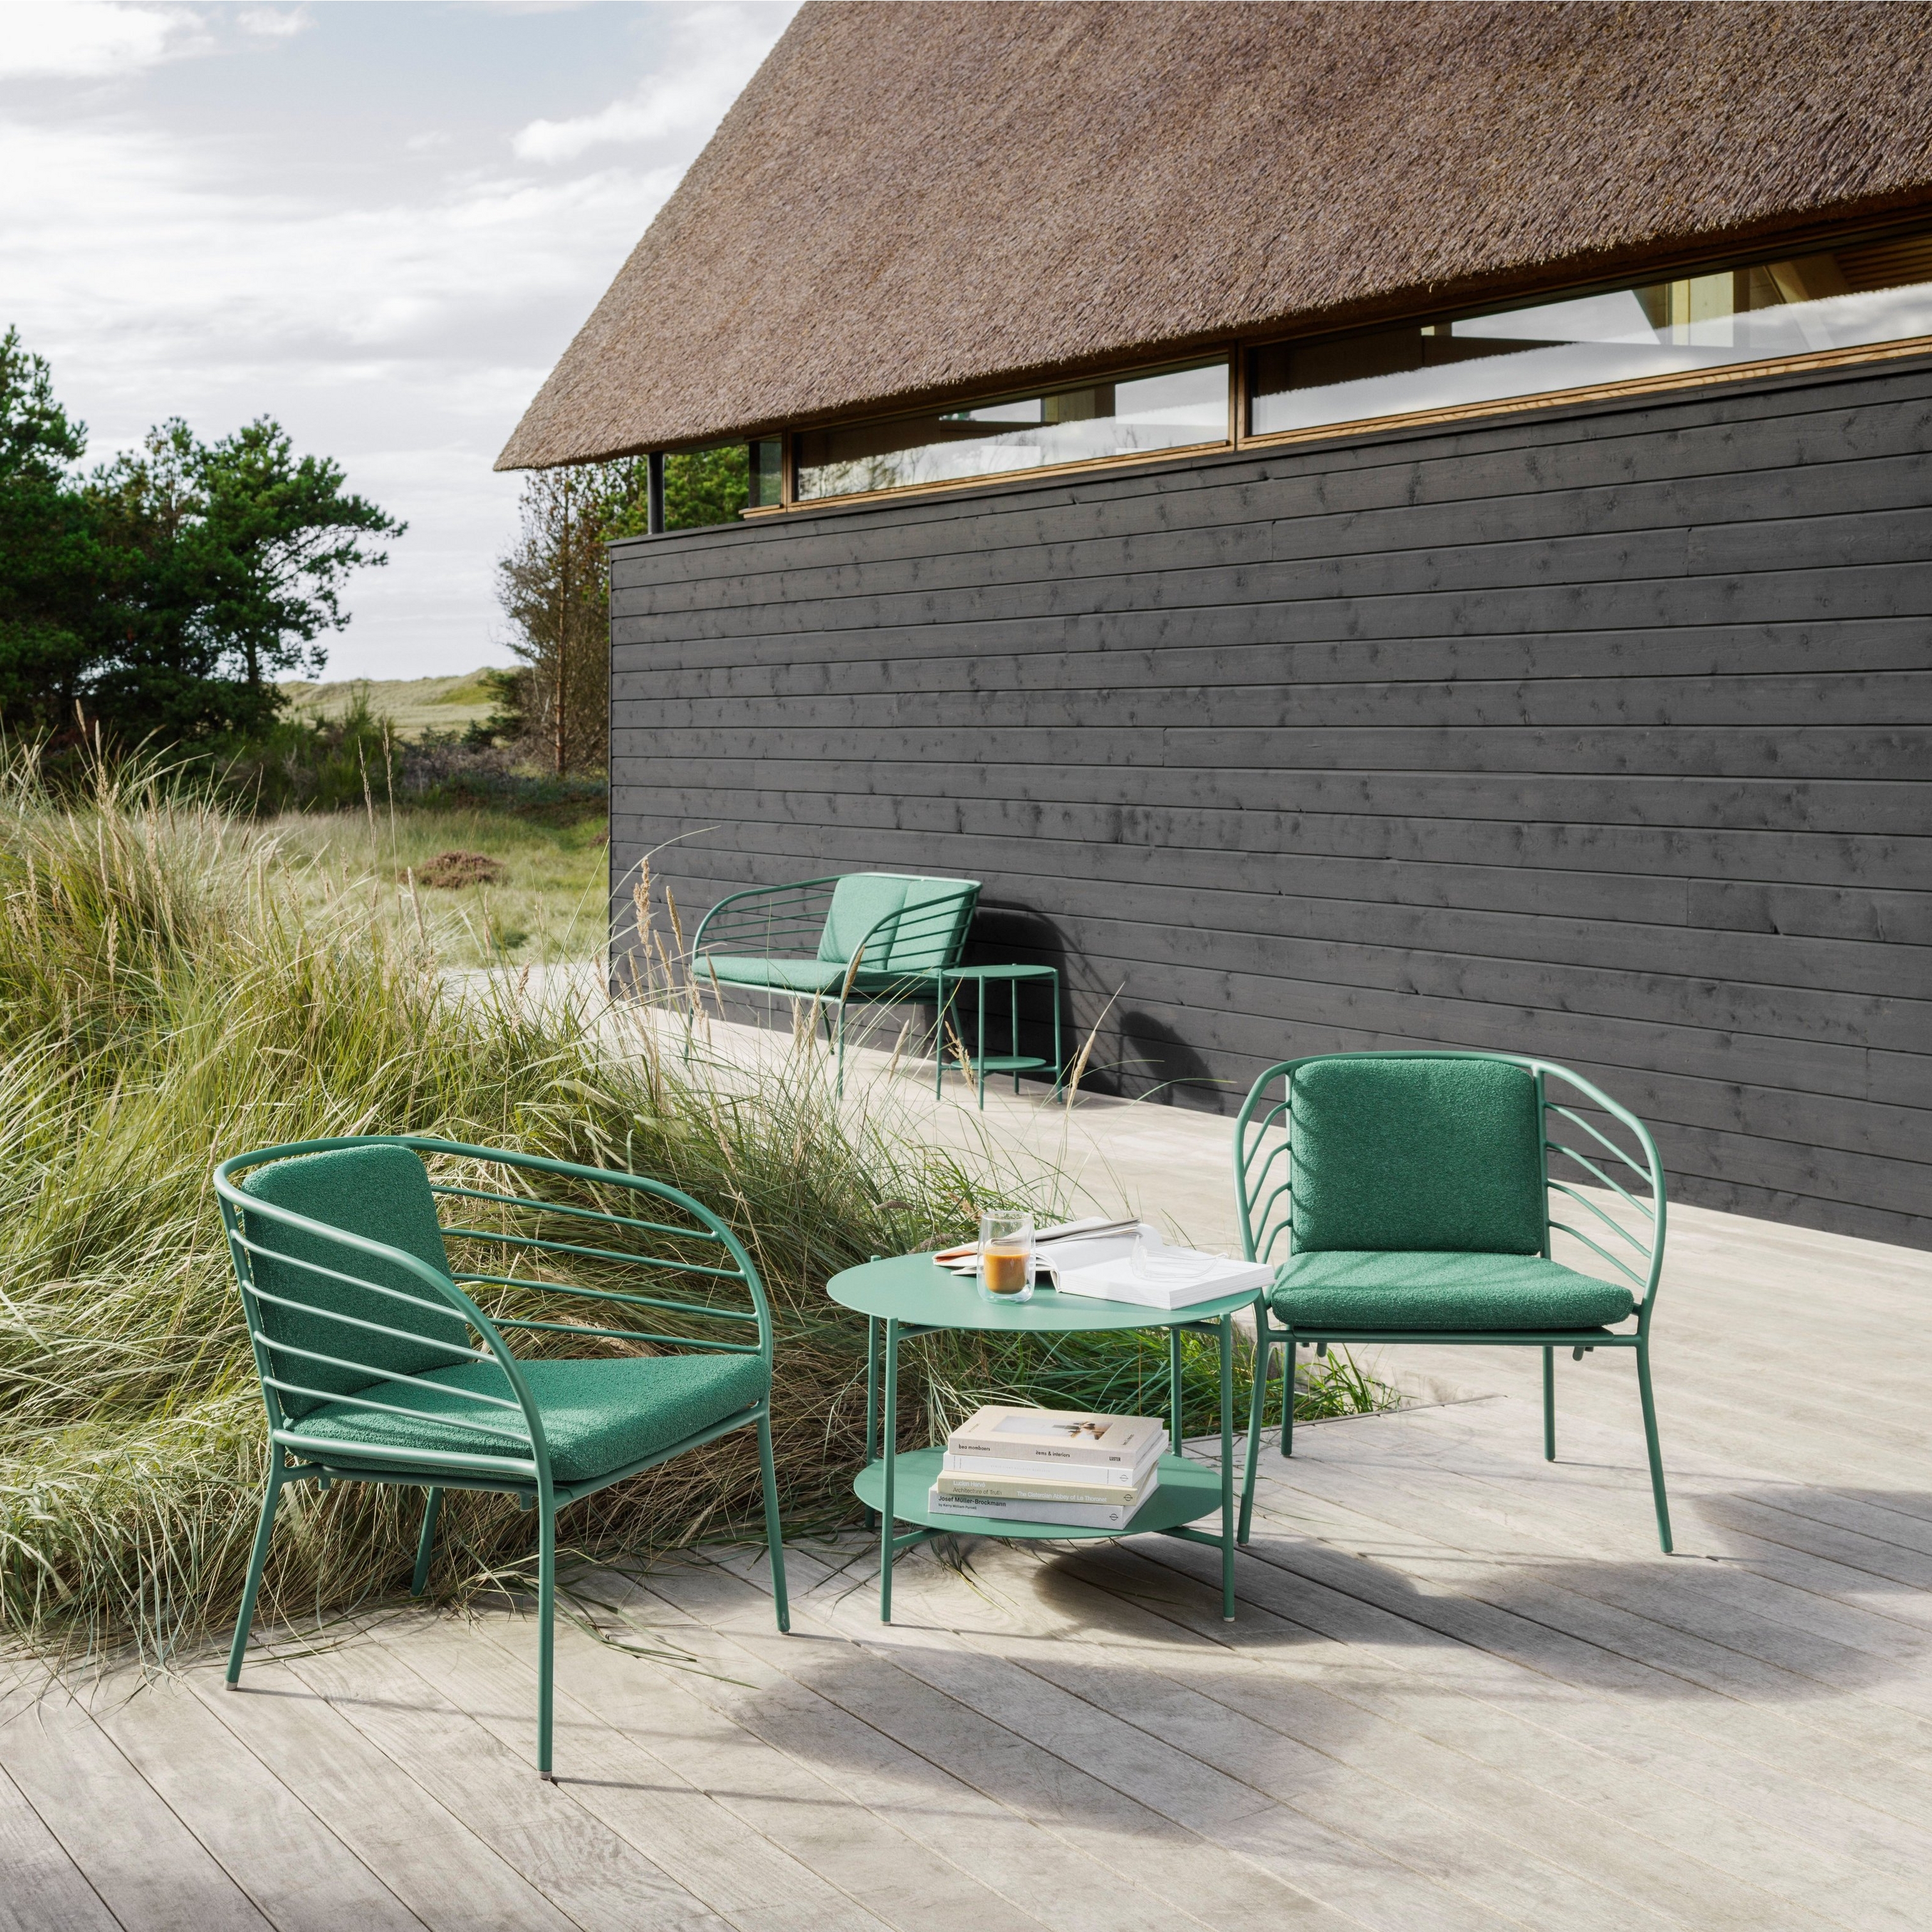 Stylish outdoor living space featuring the Cancún coffee table and lounge chairs in matt green.